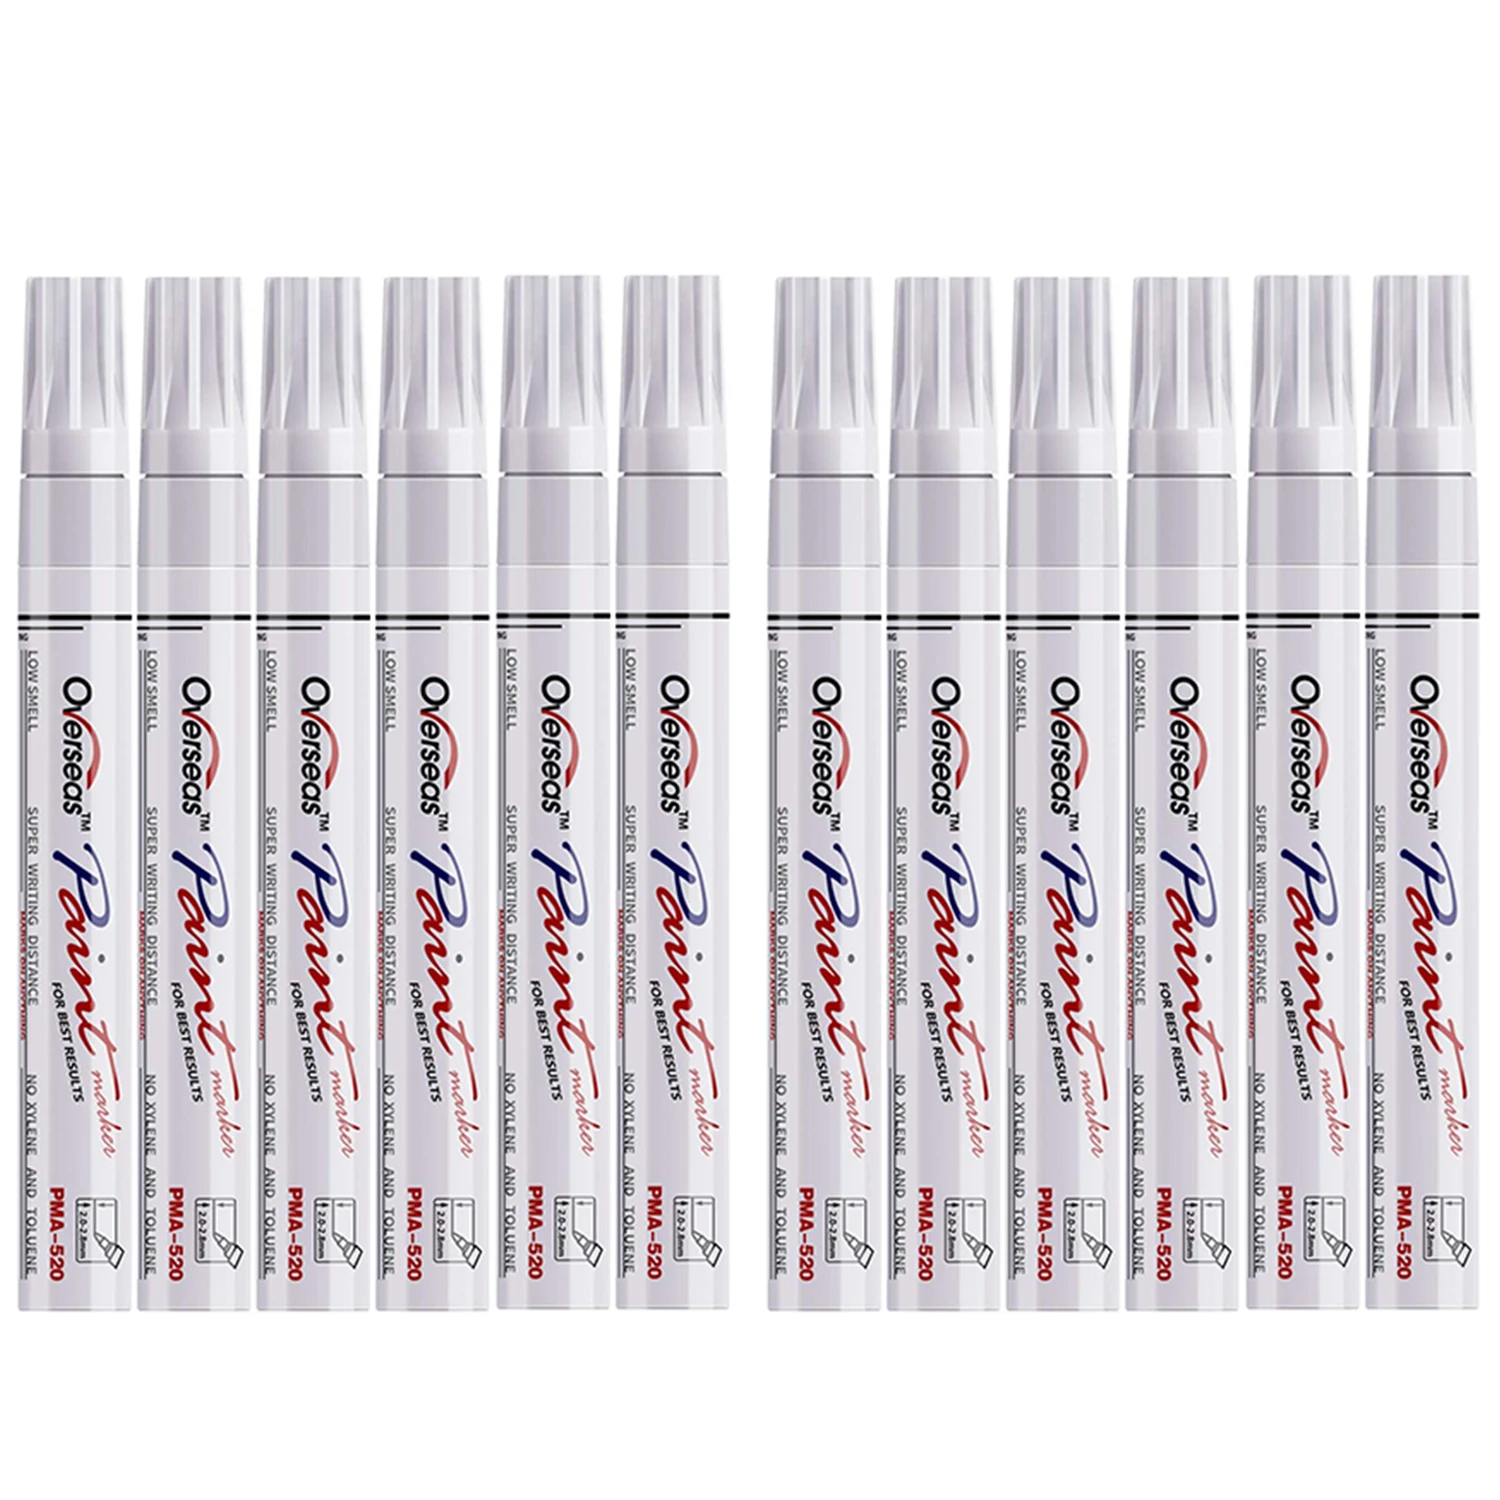 

White Paint Markers Pens Pack of 12 Permanent Oil Based Paint Pen, 2.0mm Medium Tip, Quick Dry and Waterproof Marker